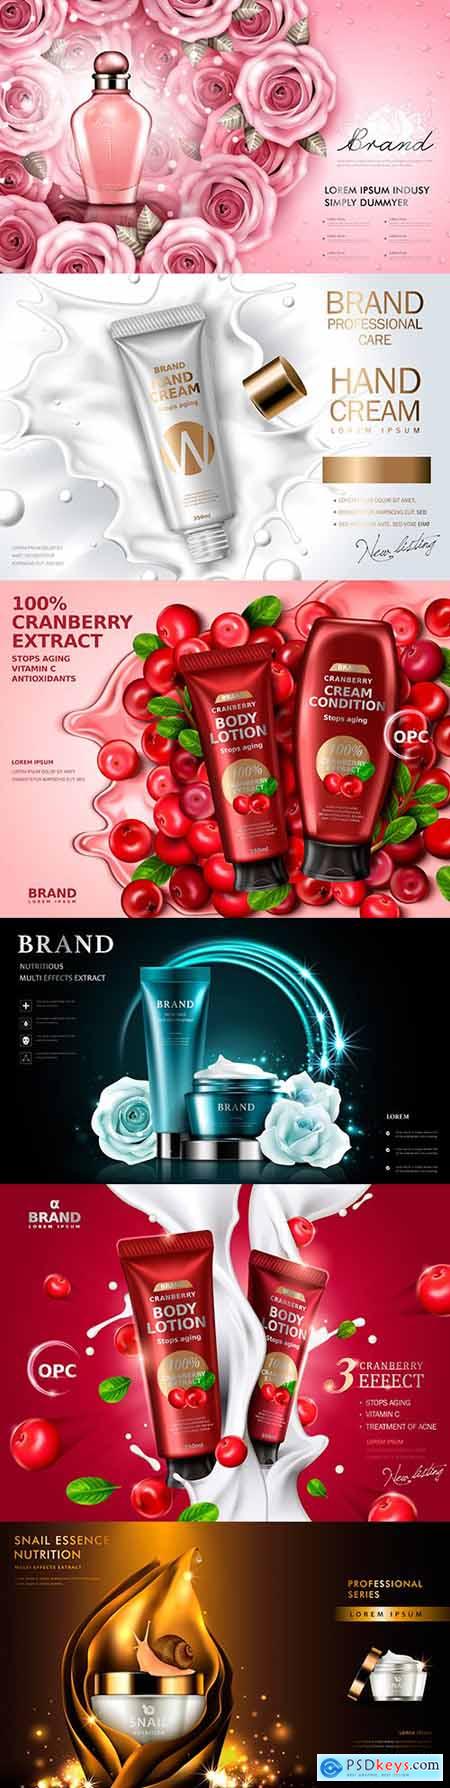 Cosmetics kit and perfume water advertising realistic design